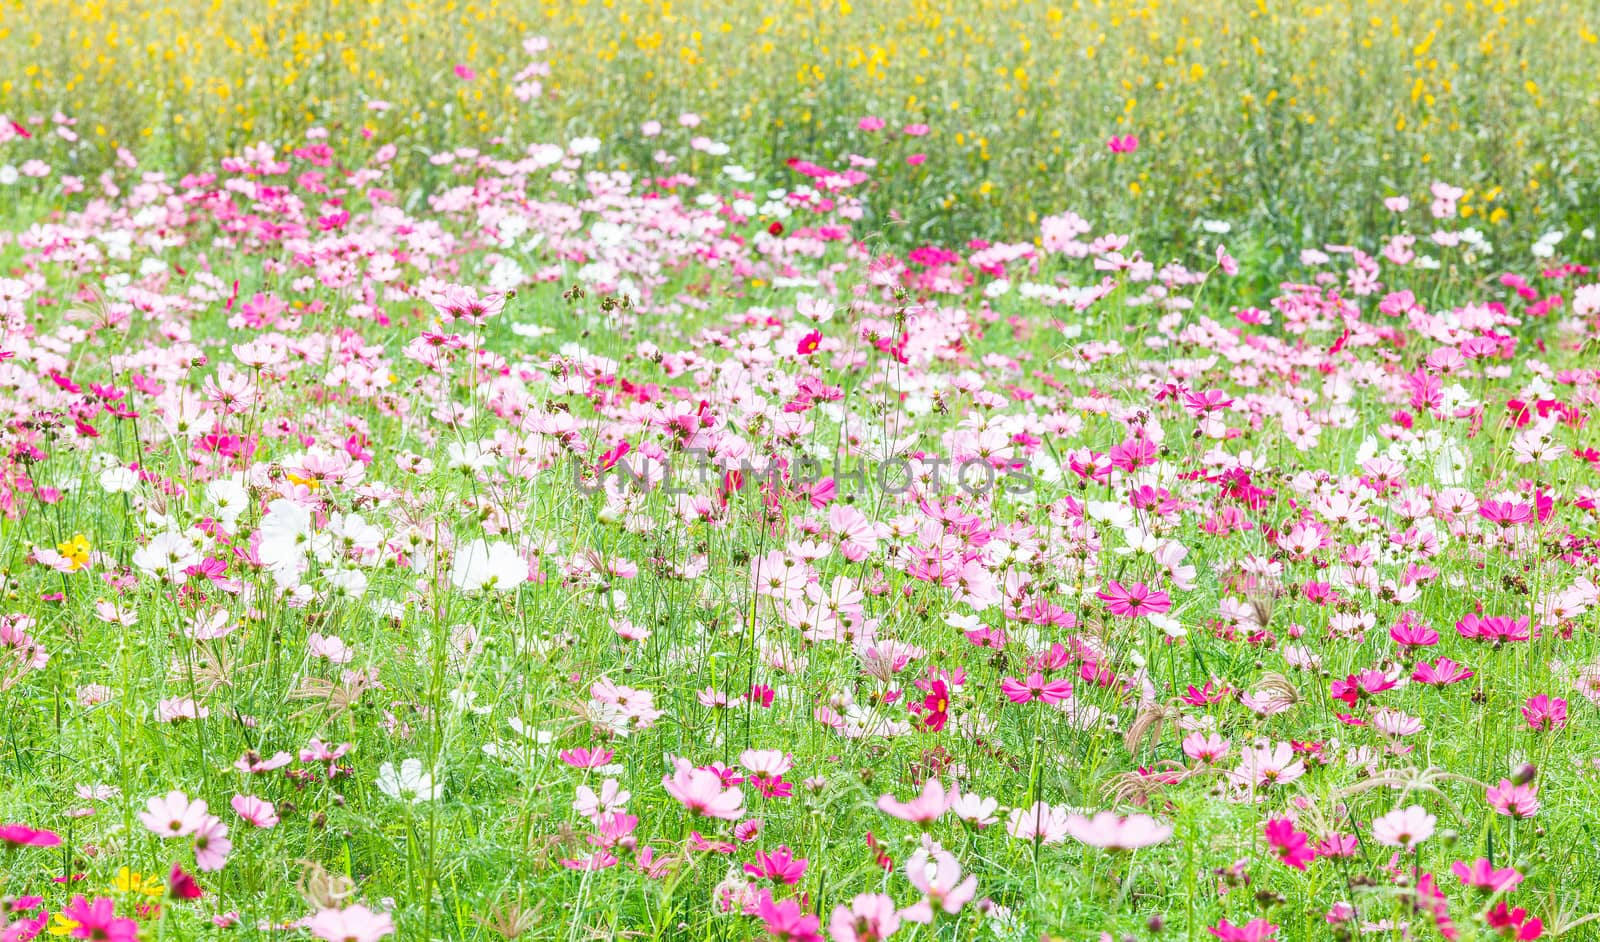 beautiful flowers in the meadow  by jame_j@homail.com